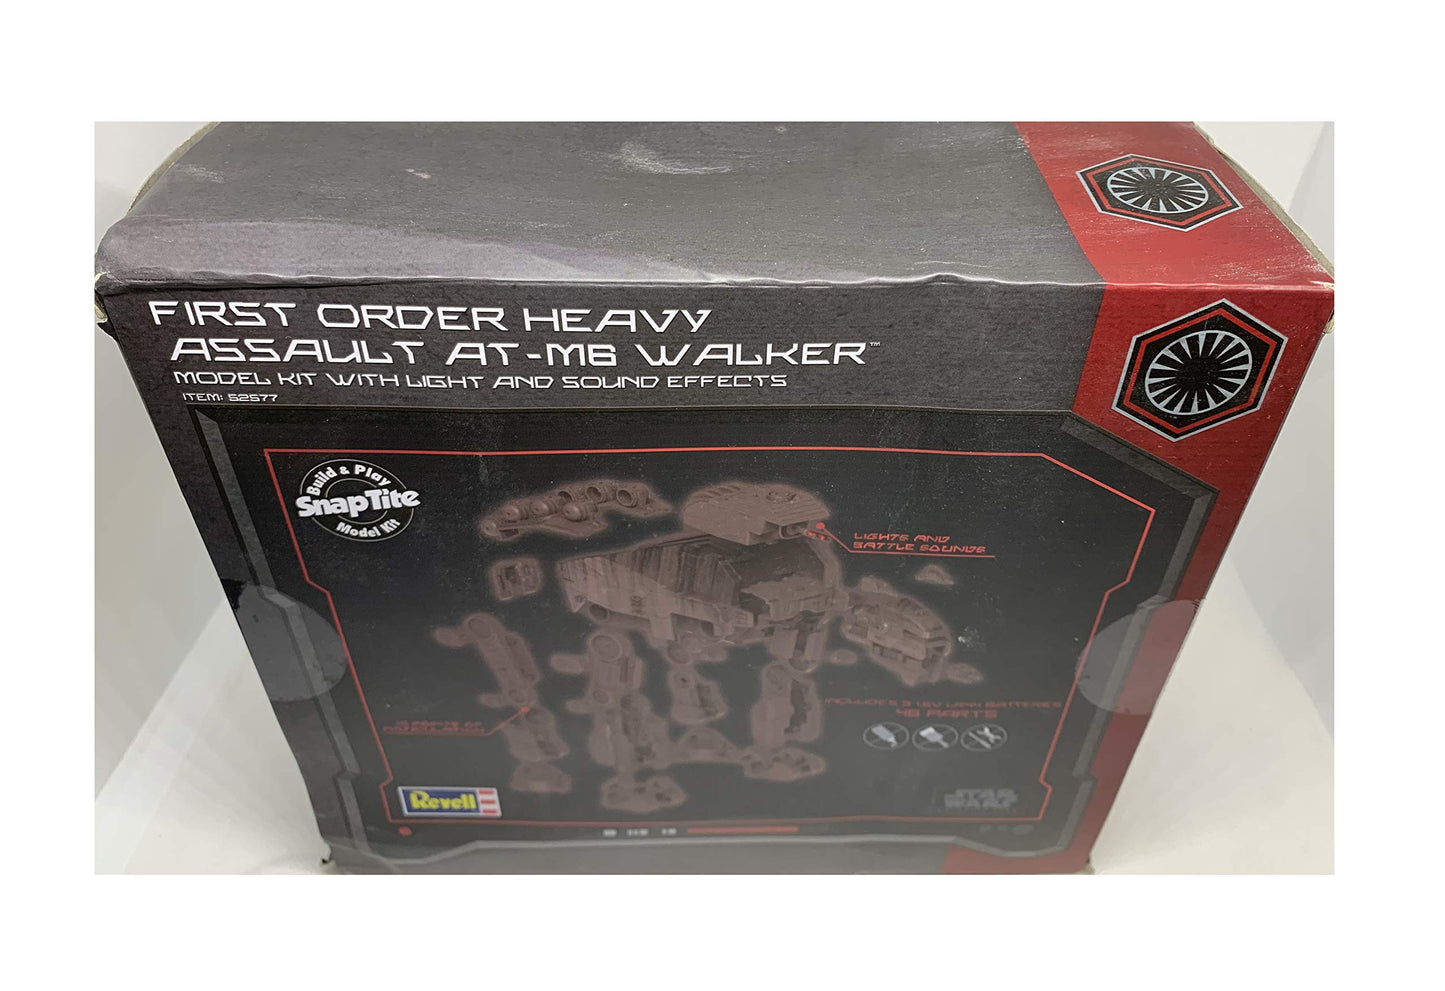 Disney Star Wars Galaxy’s Edge Exclusive First Order Heavy Assault AT-M6 Vehicle Snap Type Model Kit With Light And Sound Effects - Mint In Sealed Box